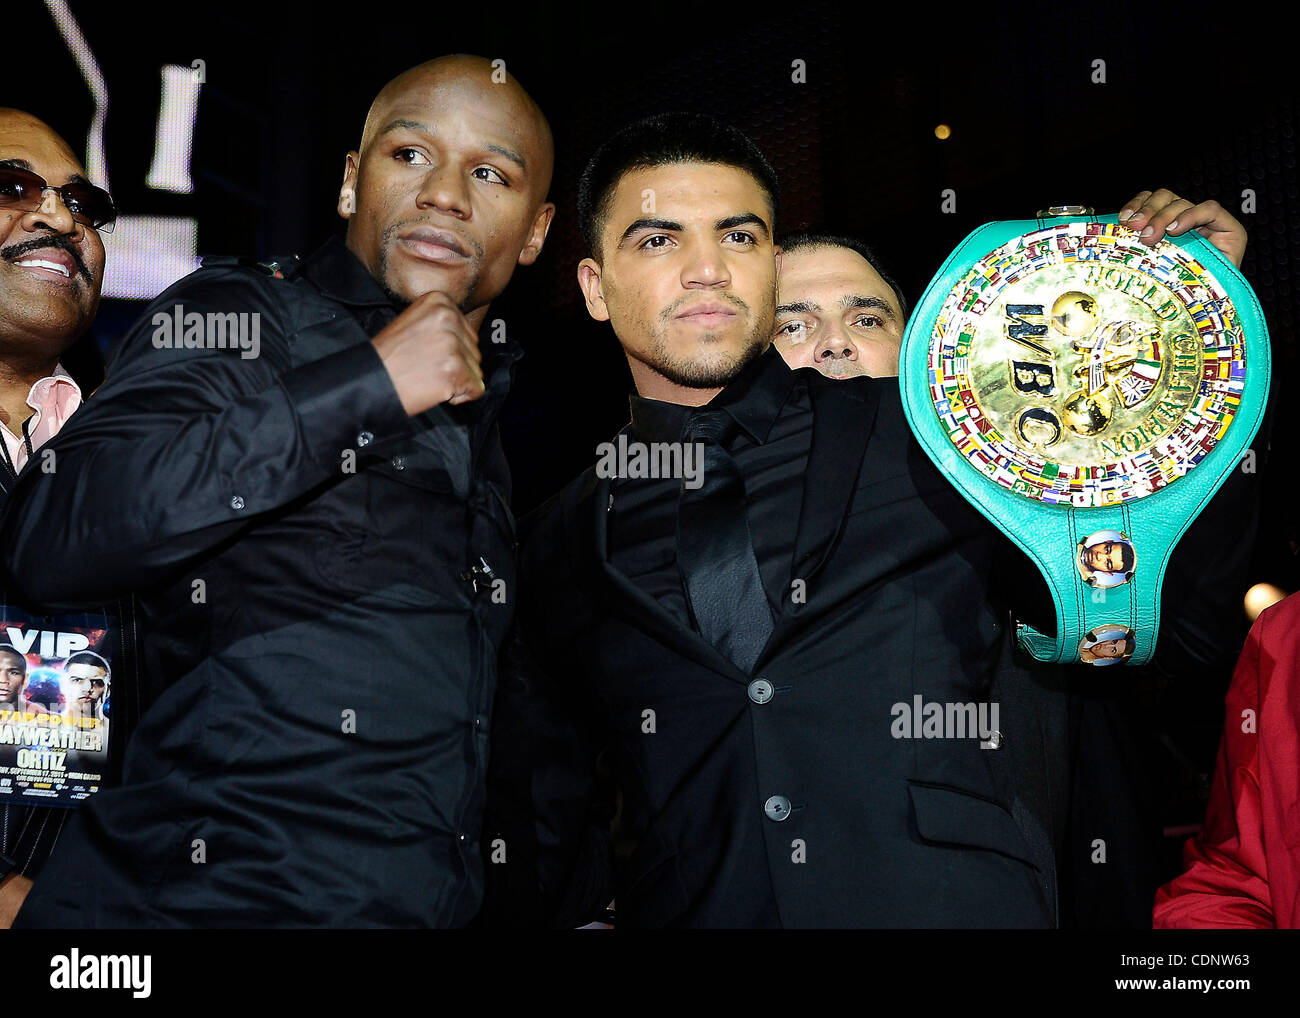 June 29,2011 - Los Angeles, California, USA. (L) Floyd Mayweather Jr. poses with Victor Ortiz at the Nokia center during a press conference on their upcoming fight on Sept 17th at the MGM grand hotel in Las Vegas for the WBC welterweight title. (Credit Image: © Gene Blevins/ZUMAPRESS.com) Stock Photo